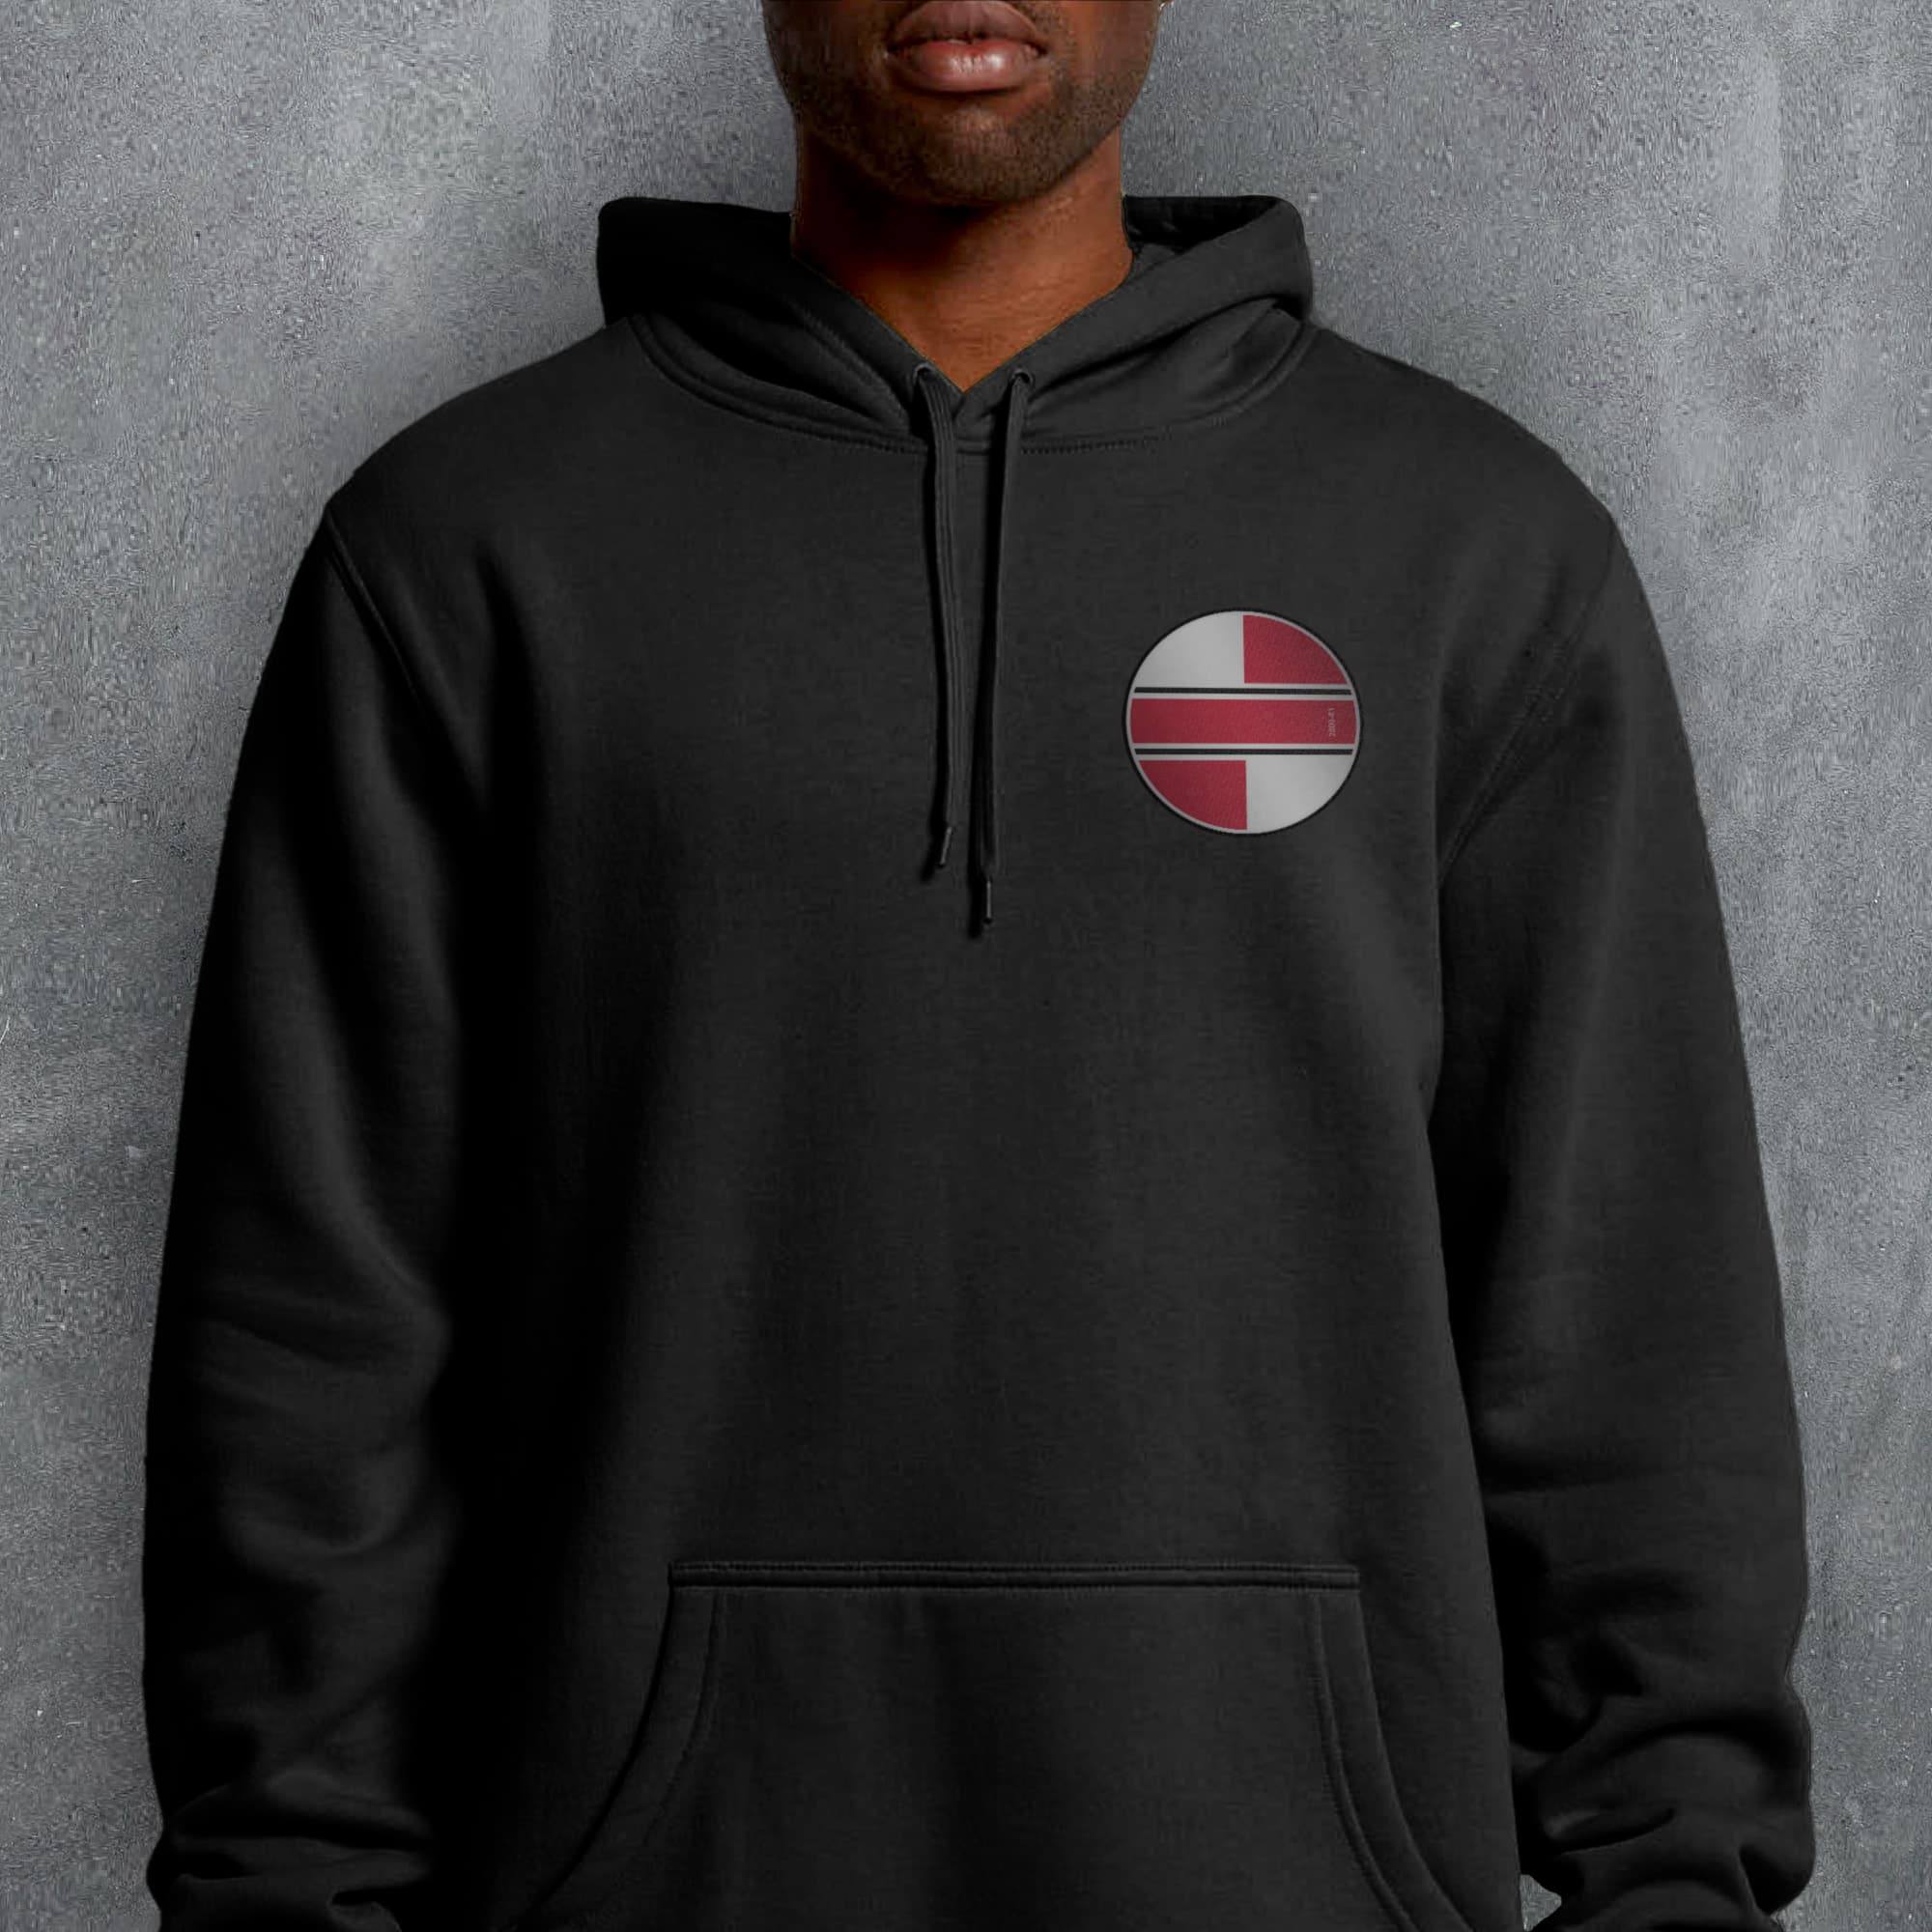 a man wearing a black hoodie with a red cross on it